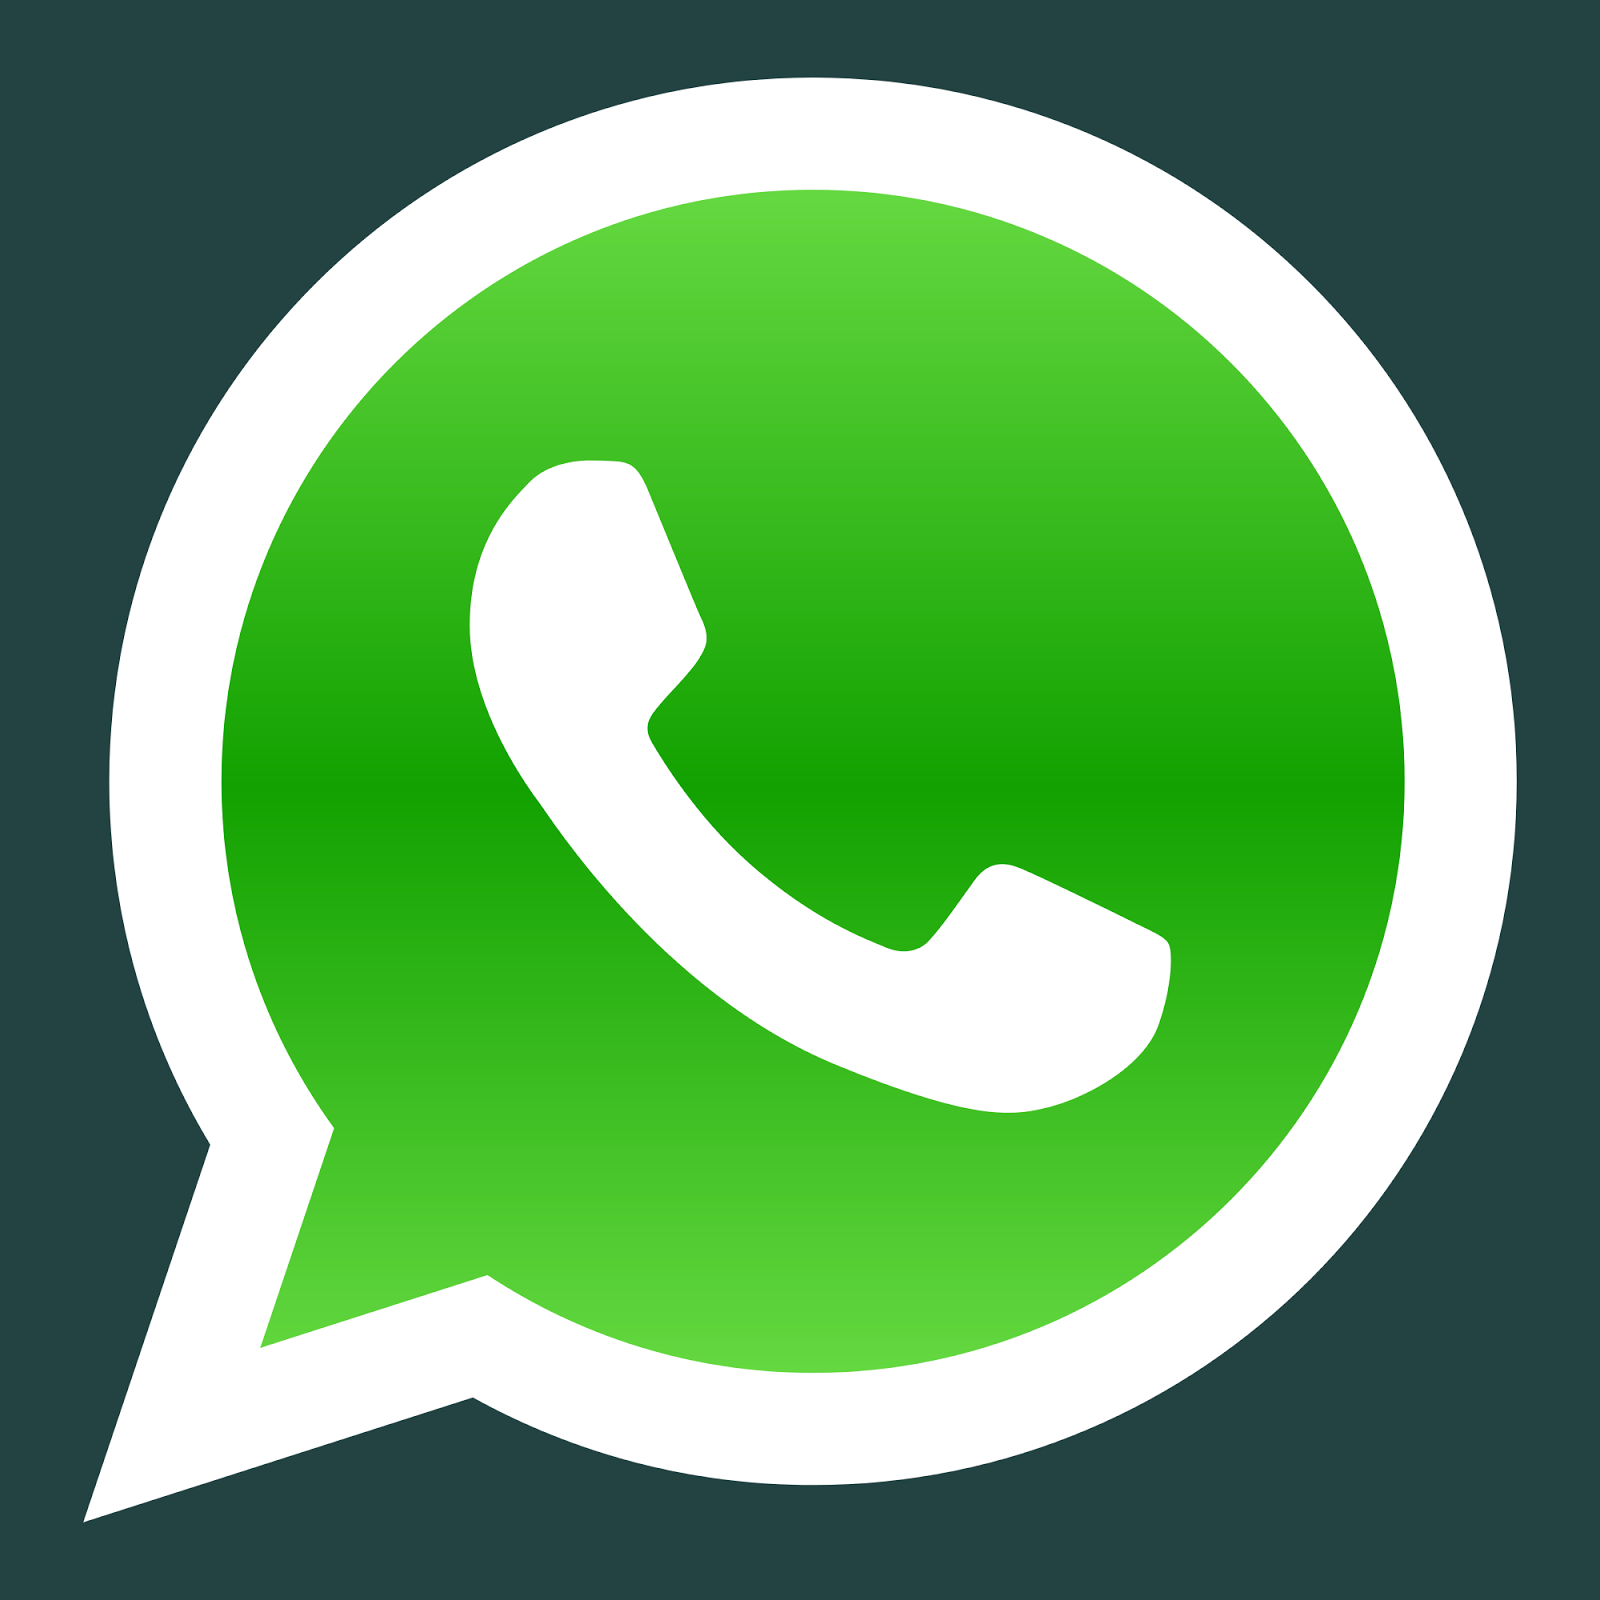 download whatsapp apps for android